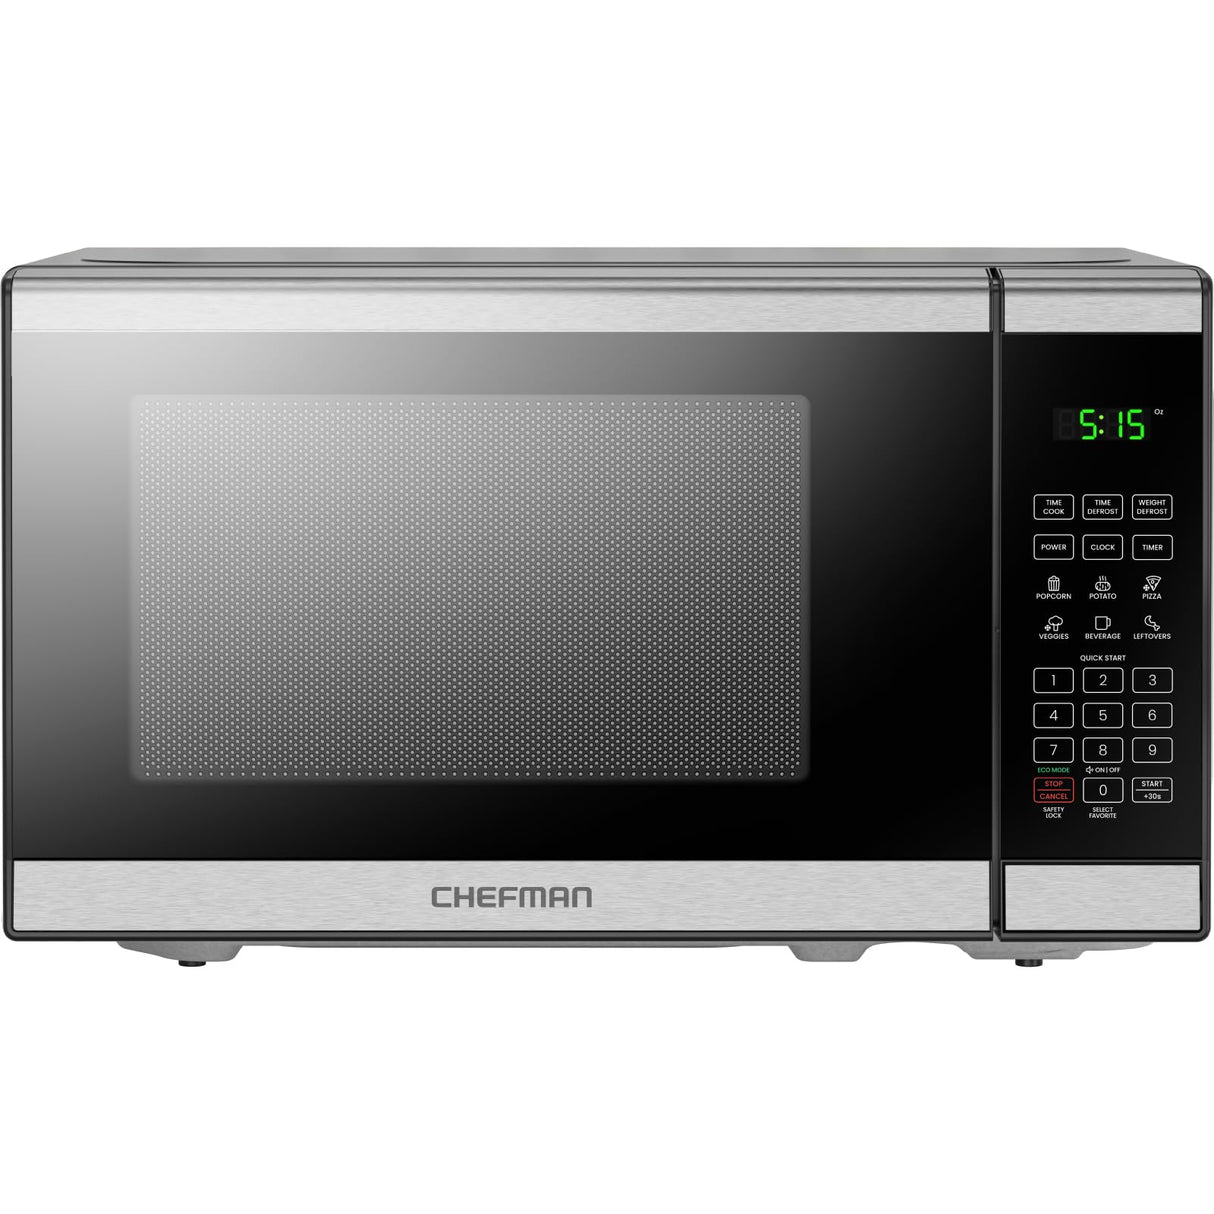 Chefman Countertop Microwave Oven 0.7 Cu. Ft. Digital Stainless Steel Microwave 700 Watts with 6 Auto Menus, 10 Power Levels, Eco Mode, Memory, Mute Function, Child Safety Lock, Easy Clean